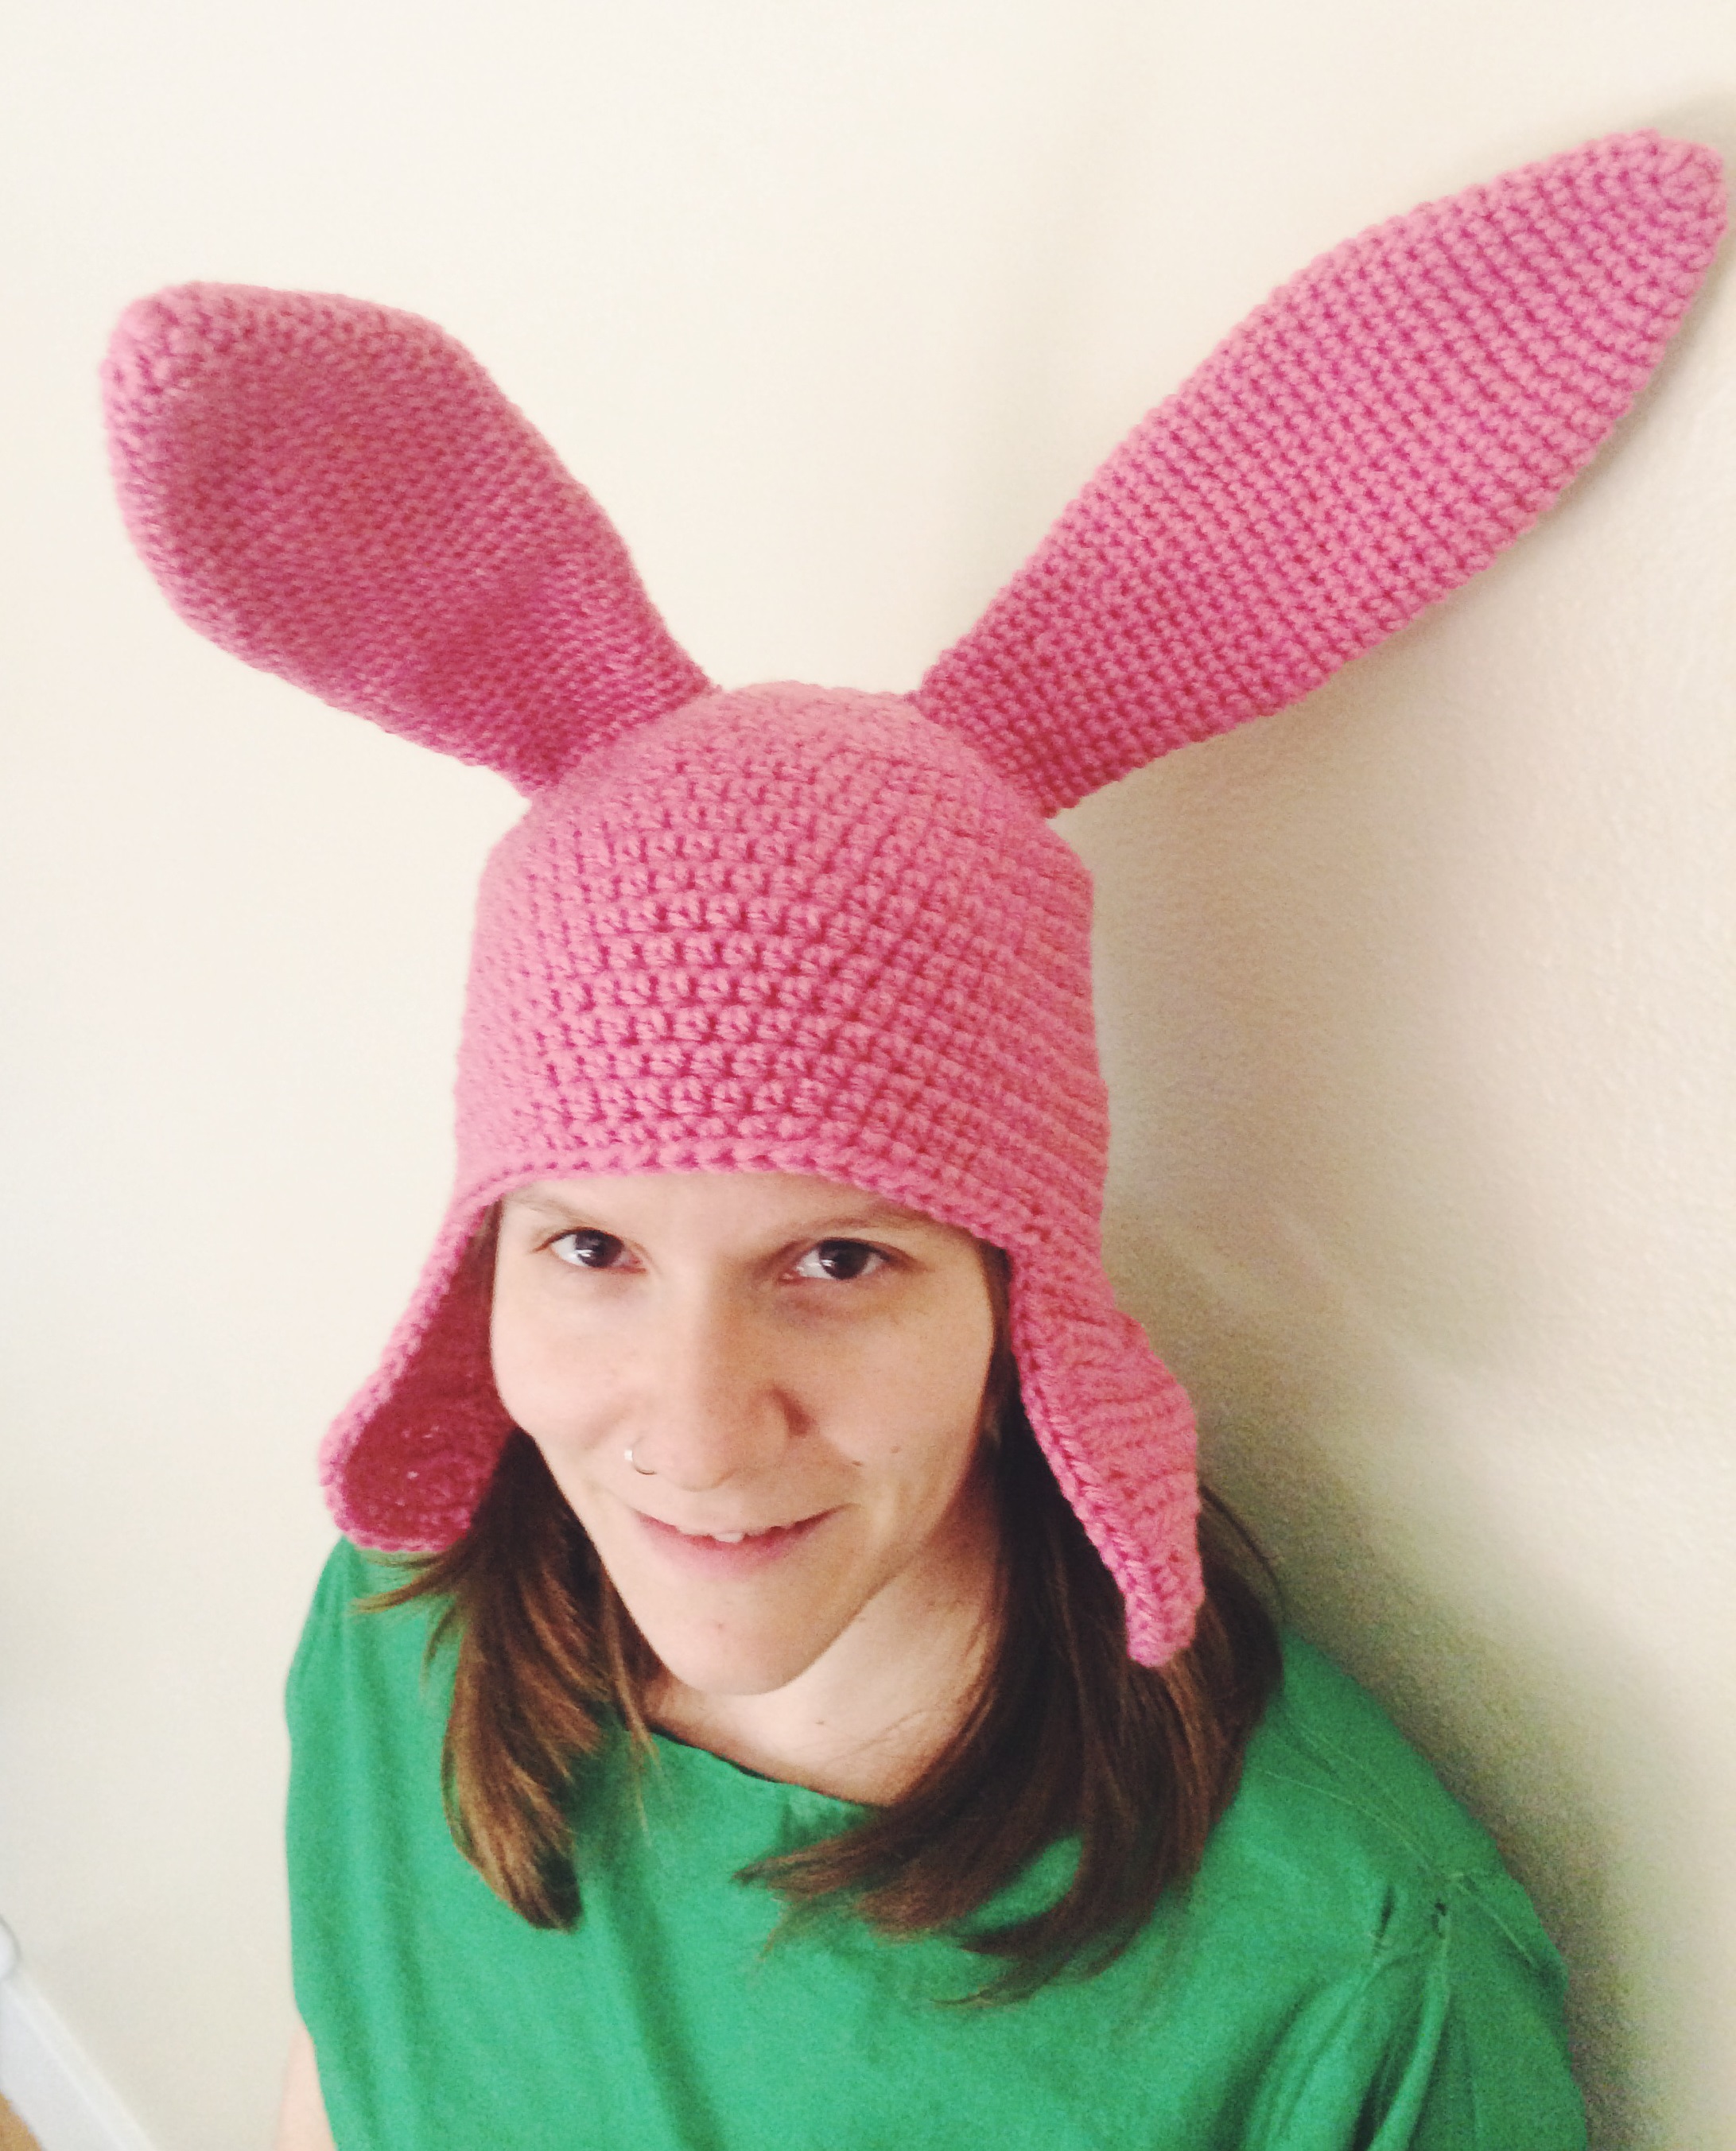 Sew a Louise Belcher / Bob's Burgers Hat  Diy bunny ears, Hat patterns to  sew, Bobs burgers